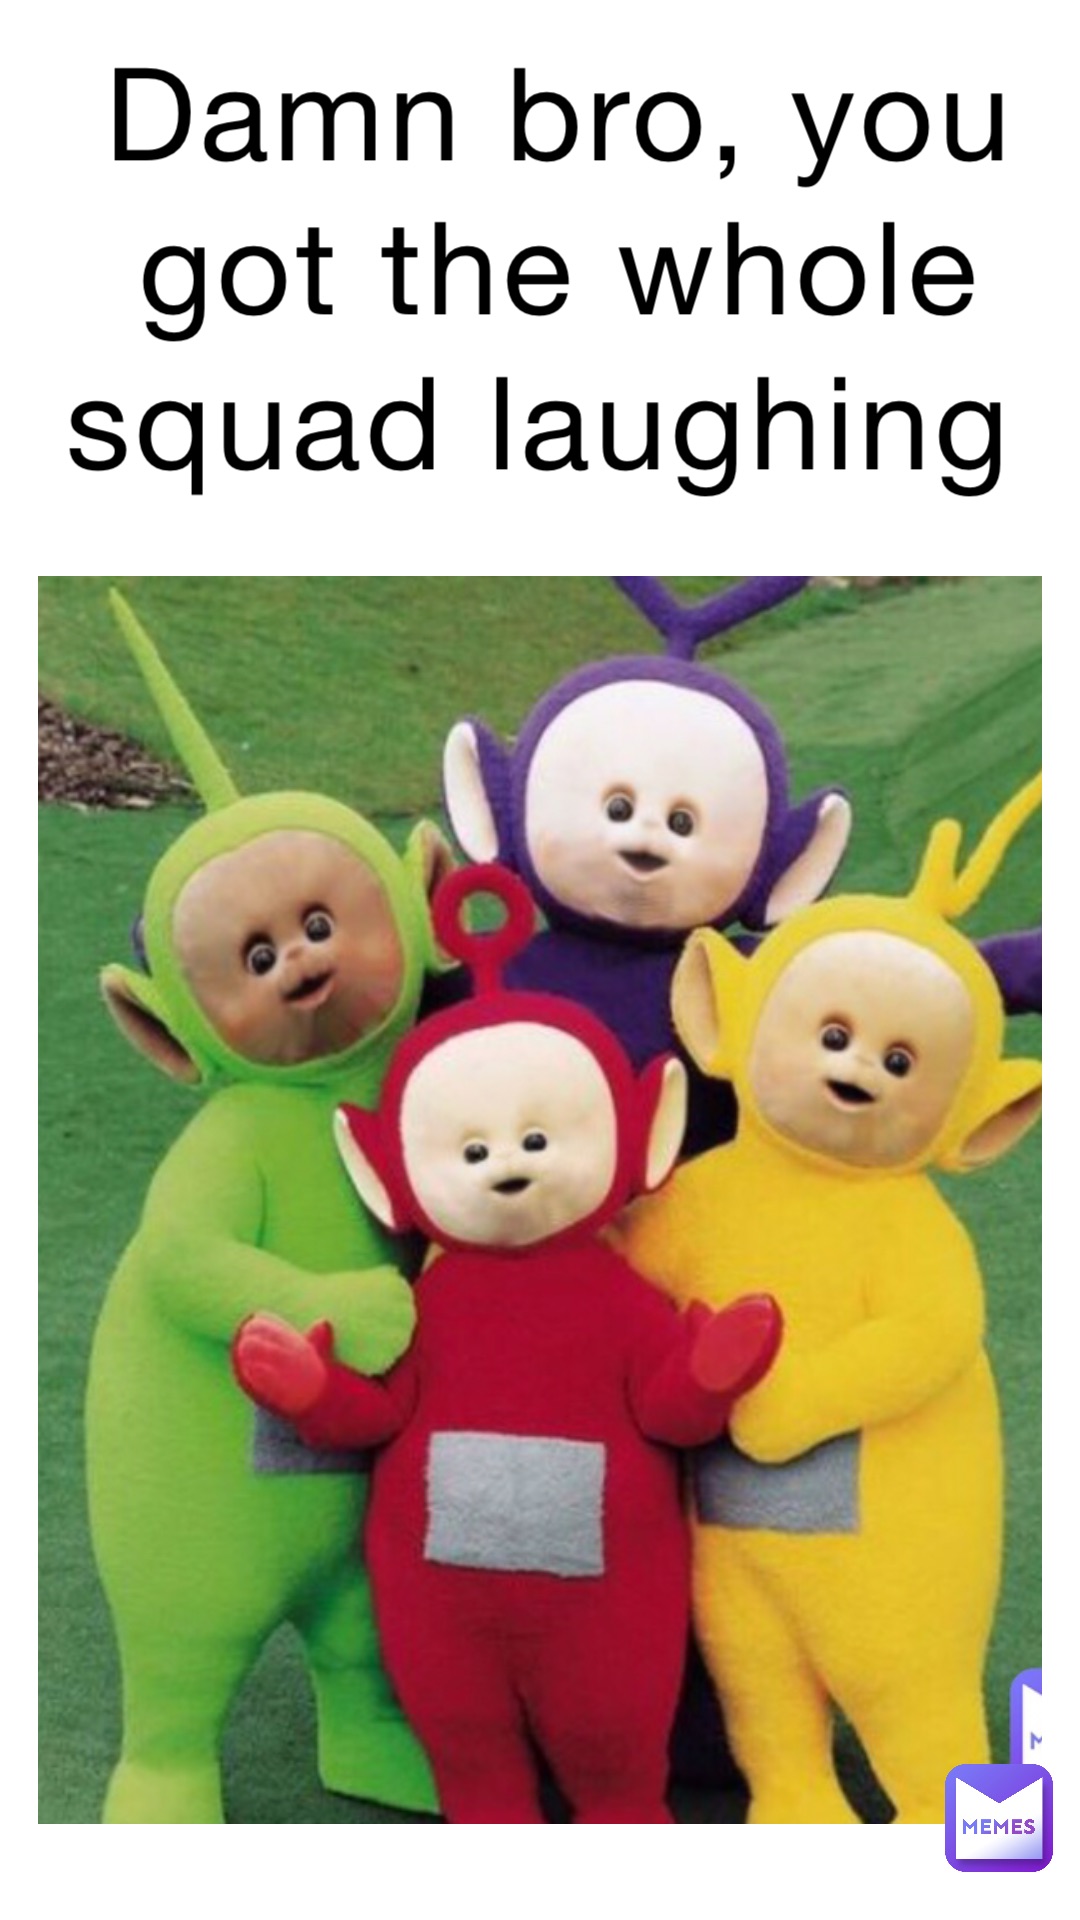 Damn bro, you got the whole squad laughing